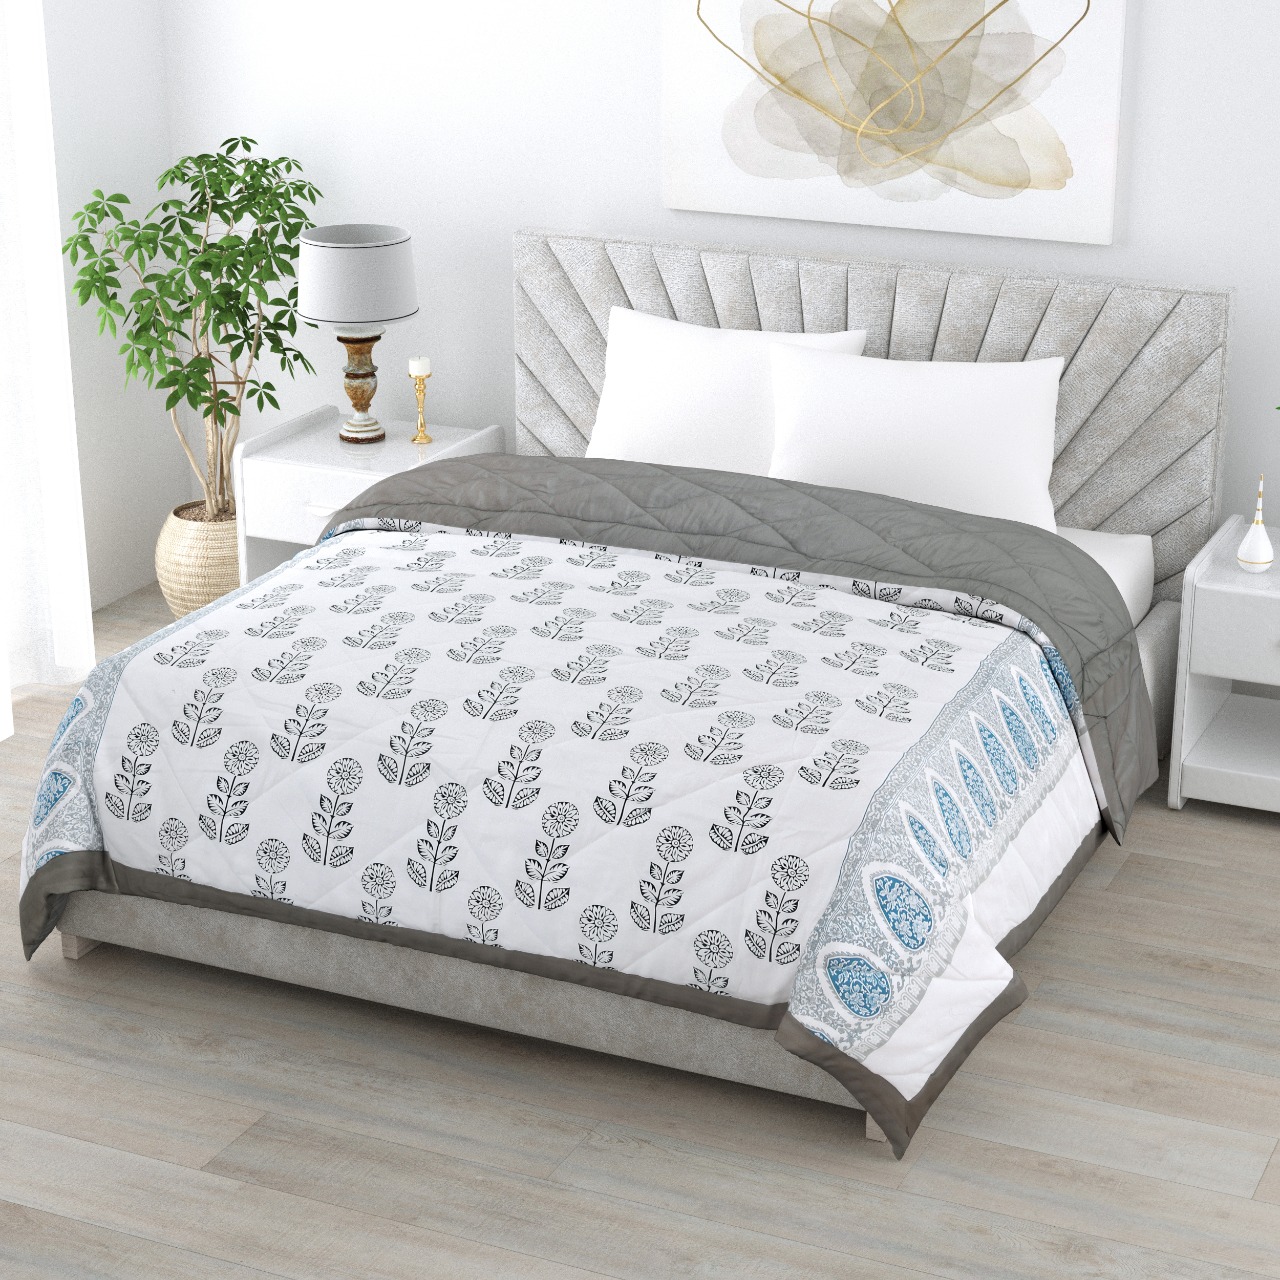 Floral Print Grey Cotton Quilted Bedcover Comforter Blanket